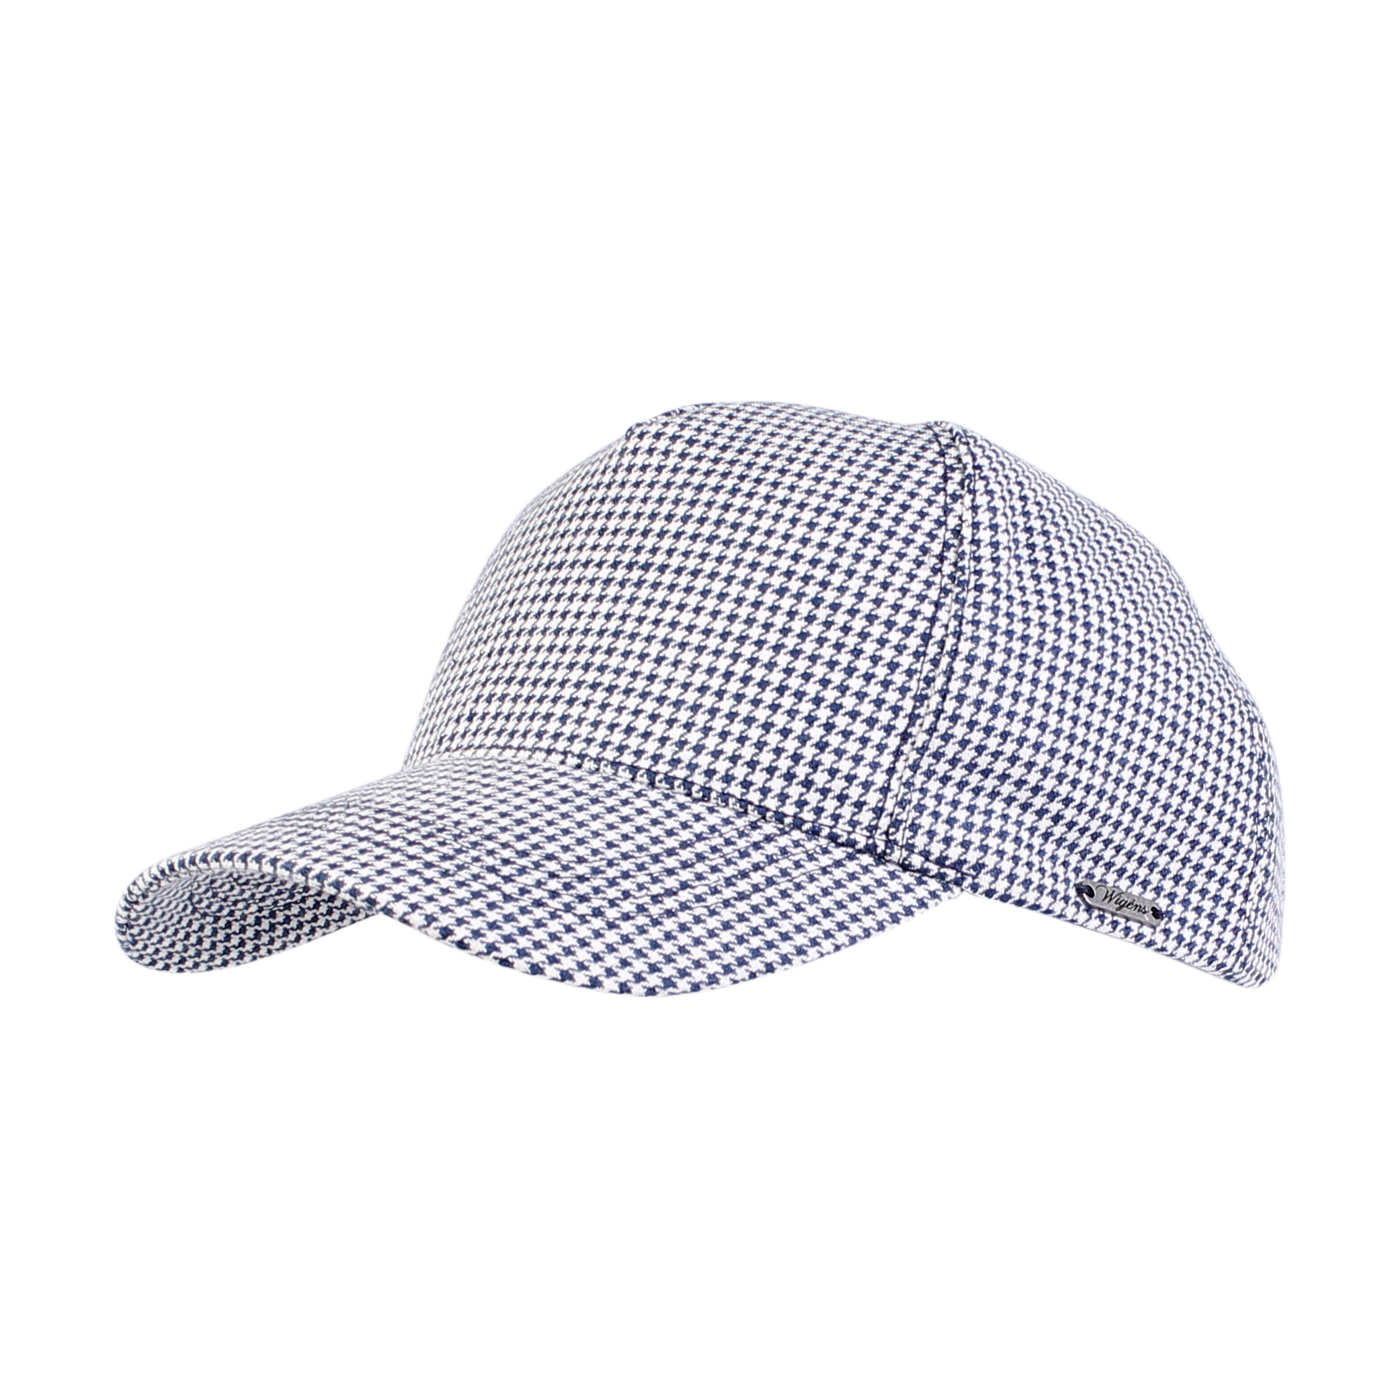 Baseball Contemporary Cap in Summer Pepita Linen Blend Houndstooth (Choice of Colors) by Wigens